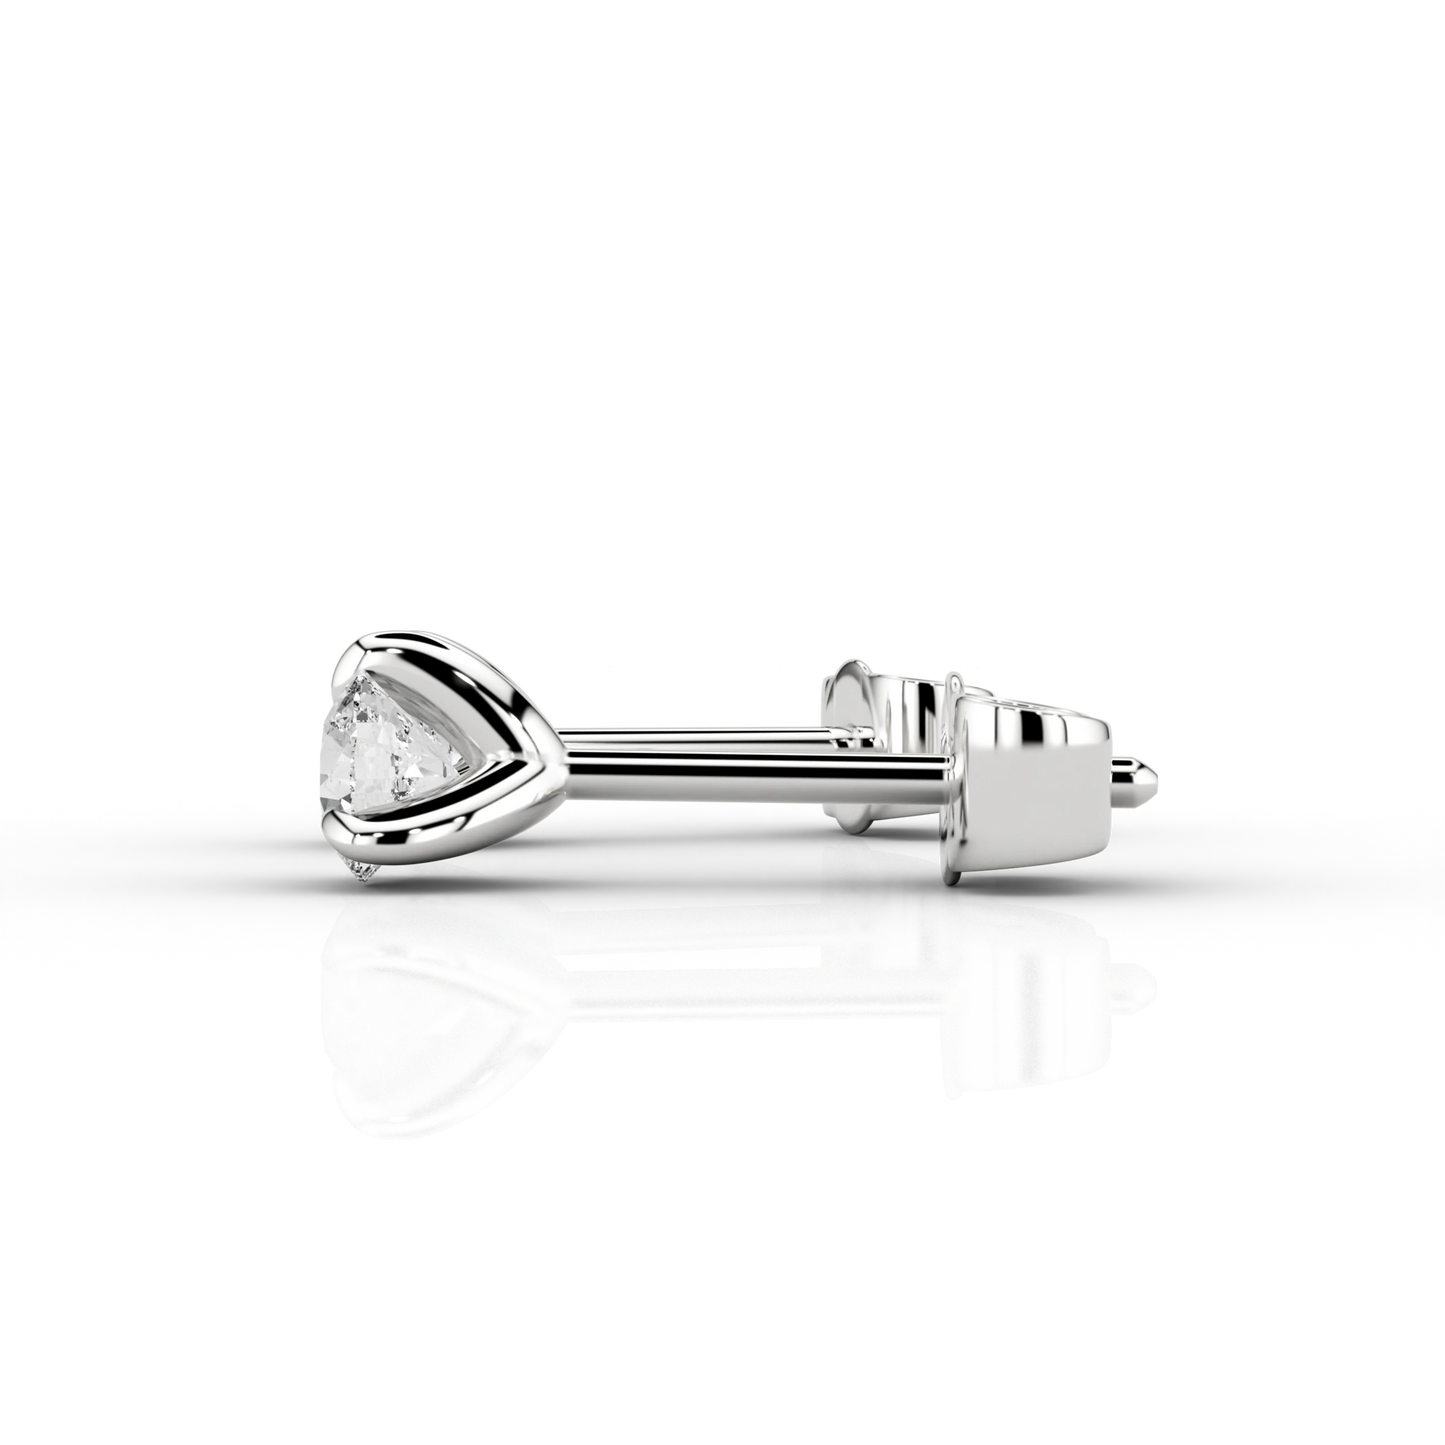 Nacelle Claw 1/3ct Earrings in Platinum